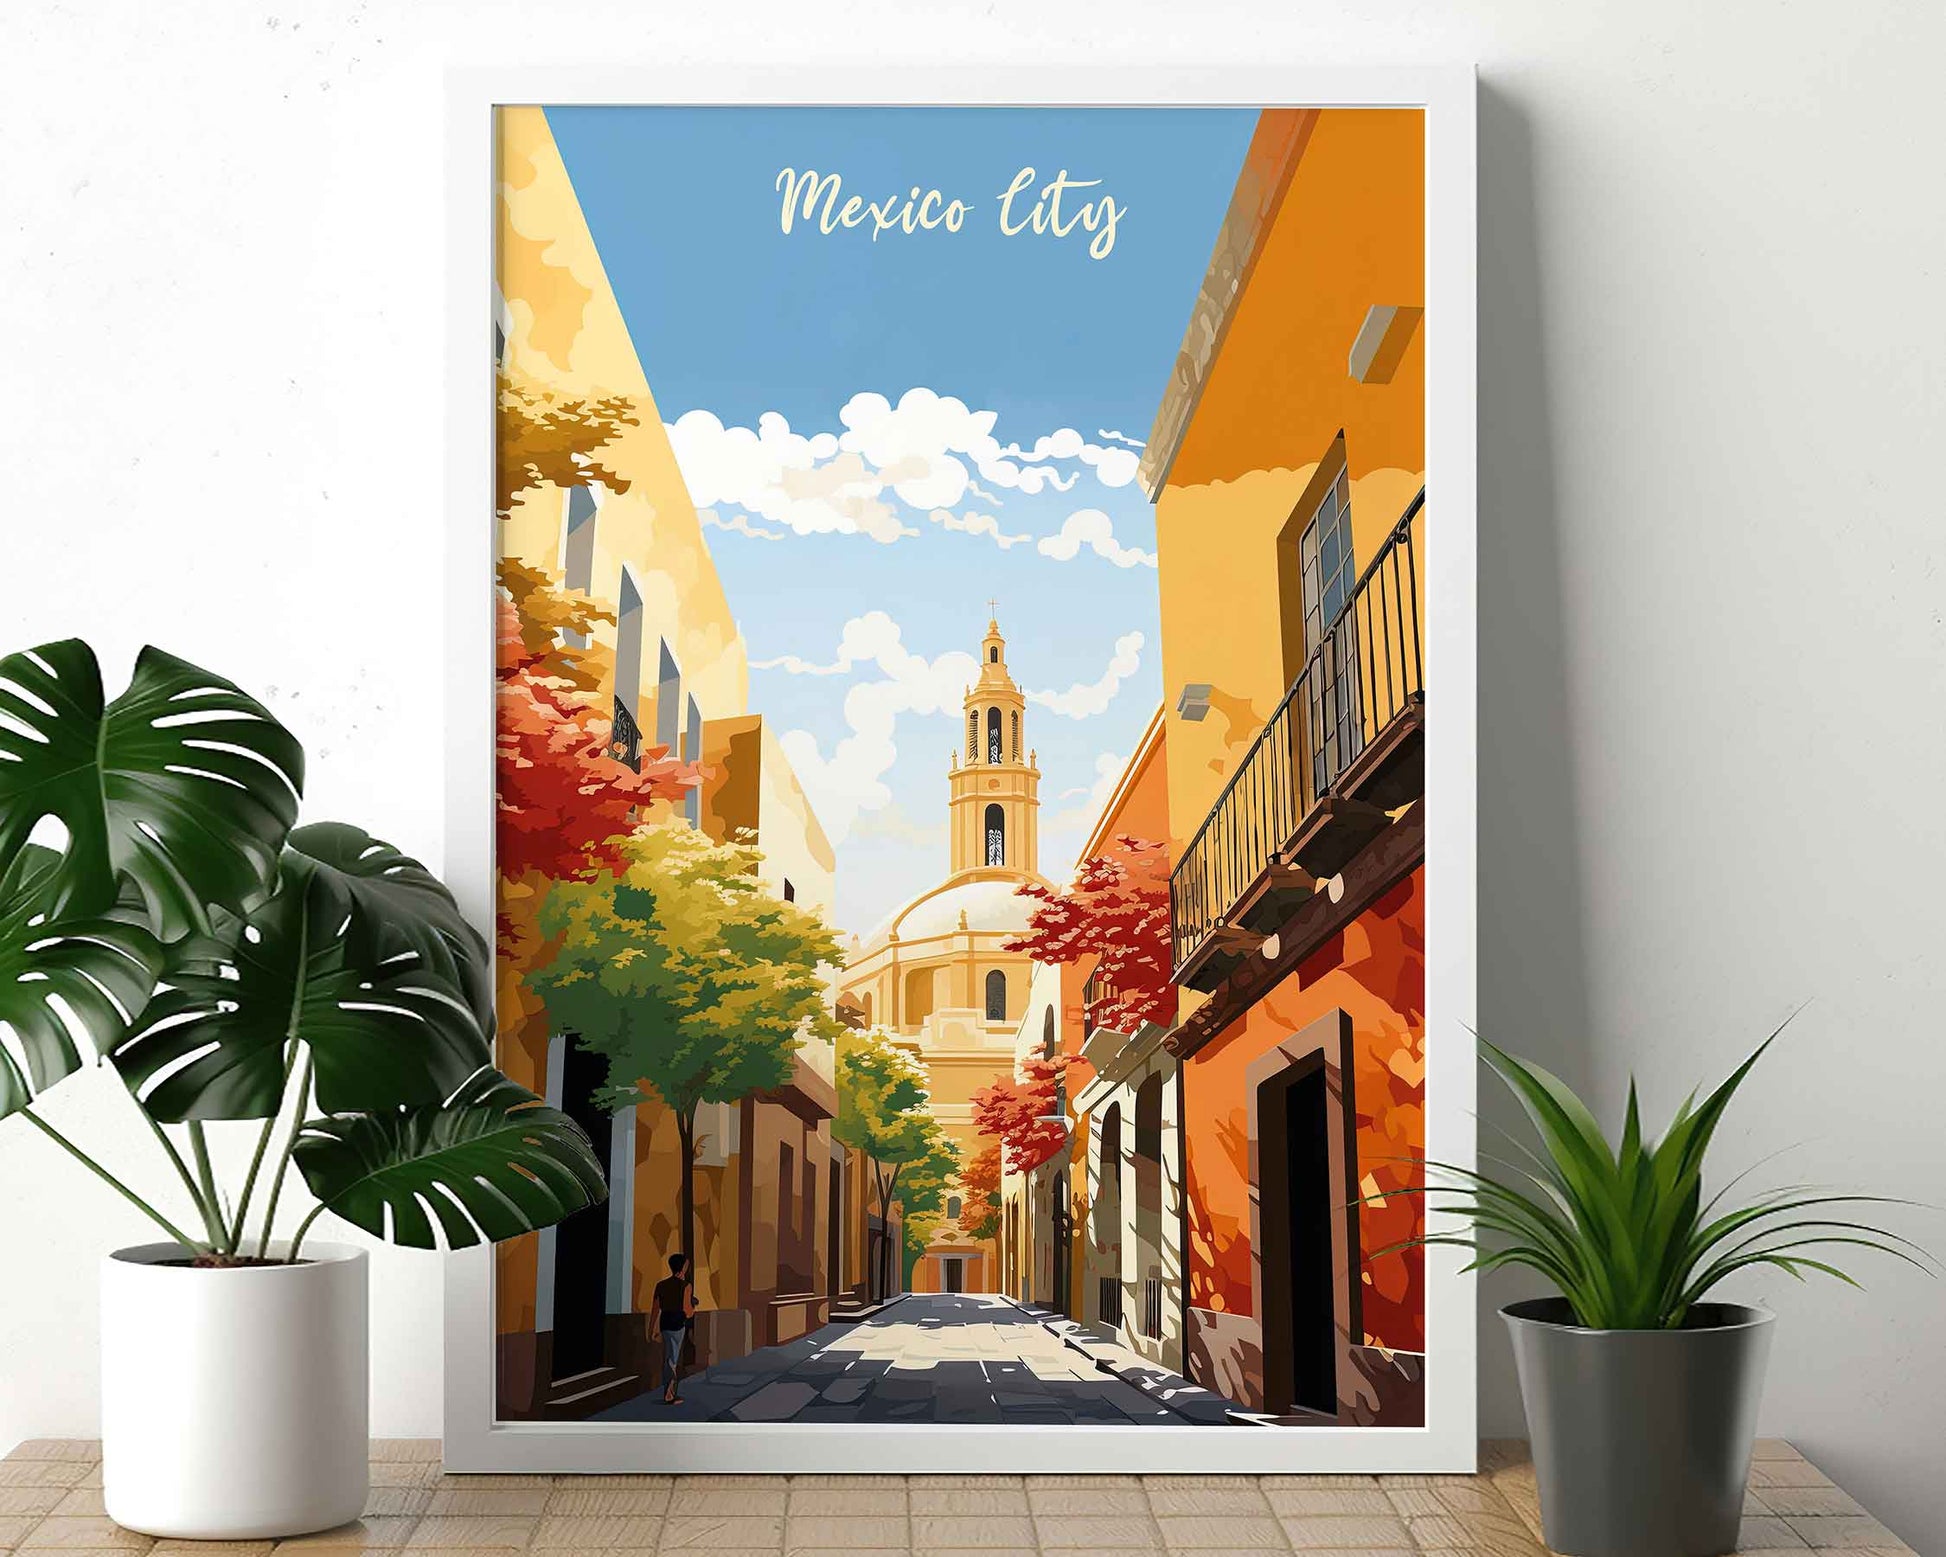 Framed Image of Mexico City Wall Art Travel Posters Illustration Prints